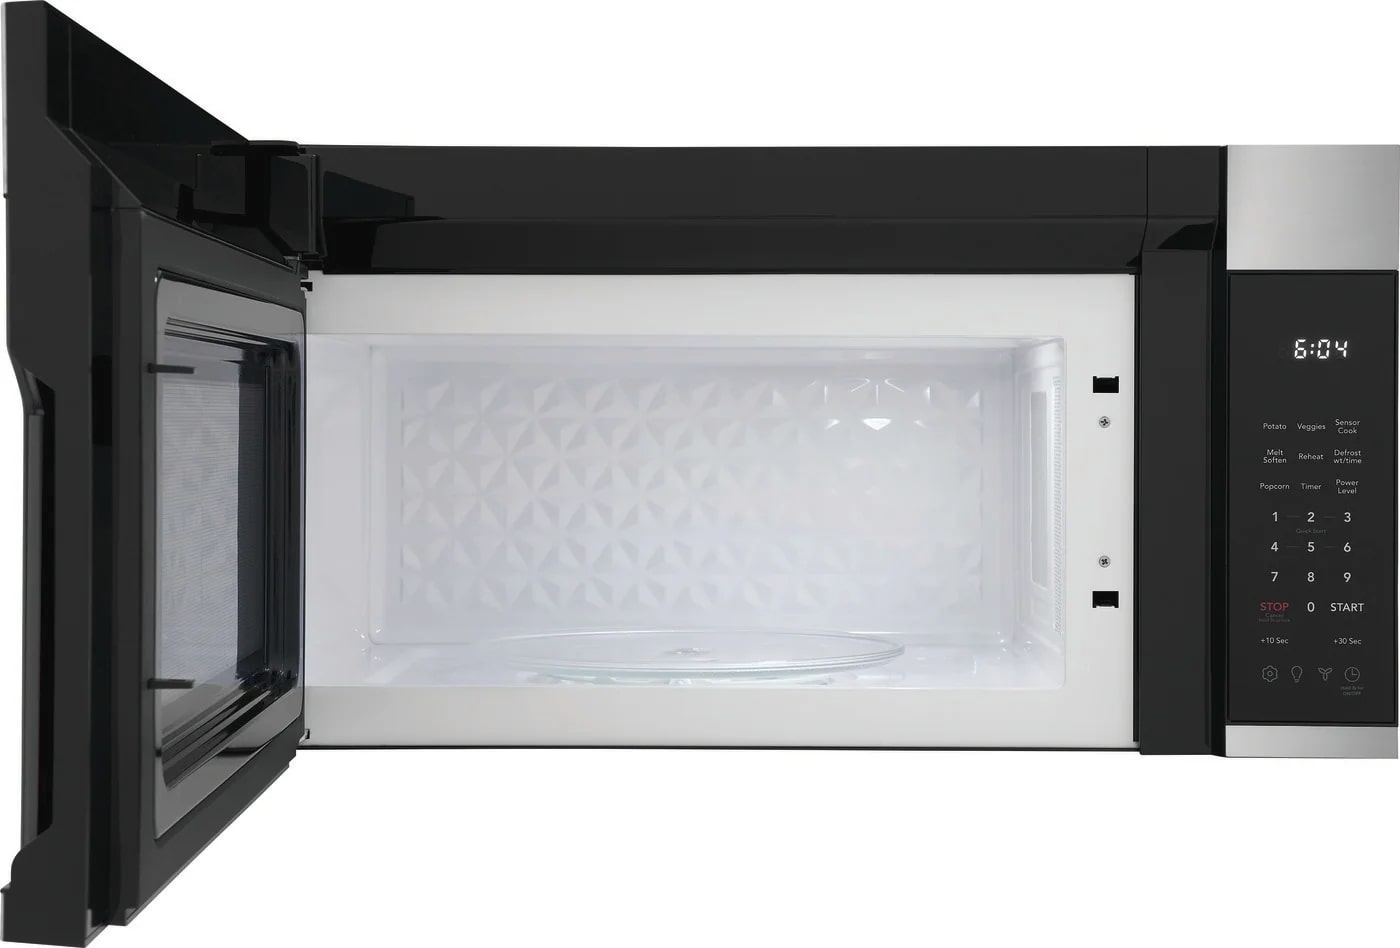 Frigidaire - 1.8 cu. Ft  Over the range Microwave in Stainless - FMOW1852AS